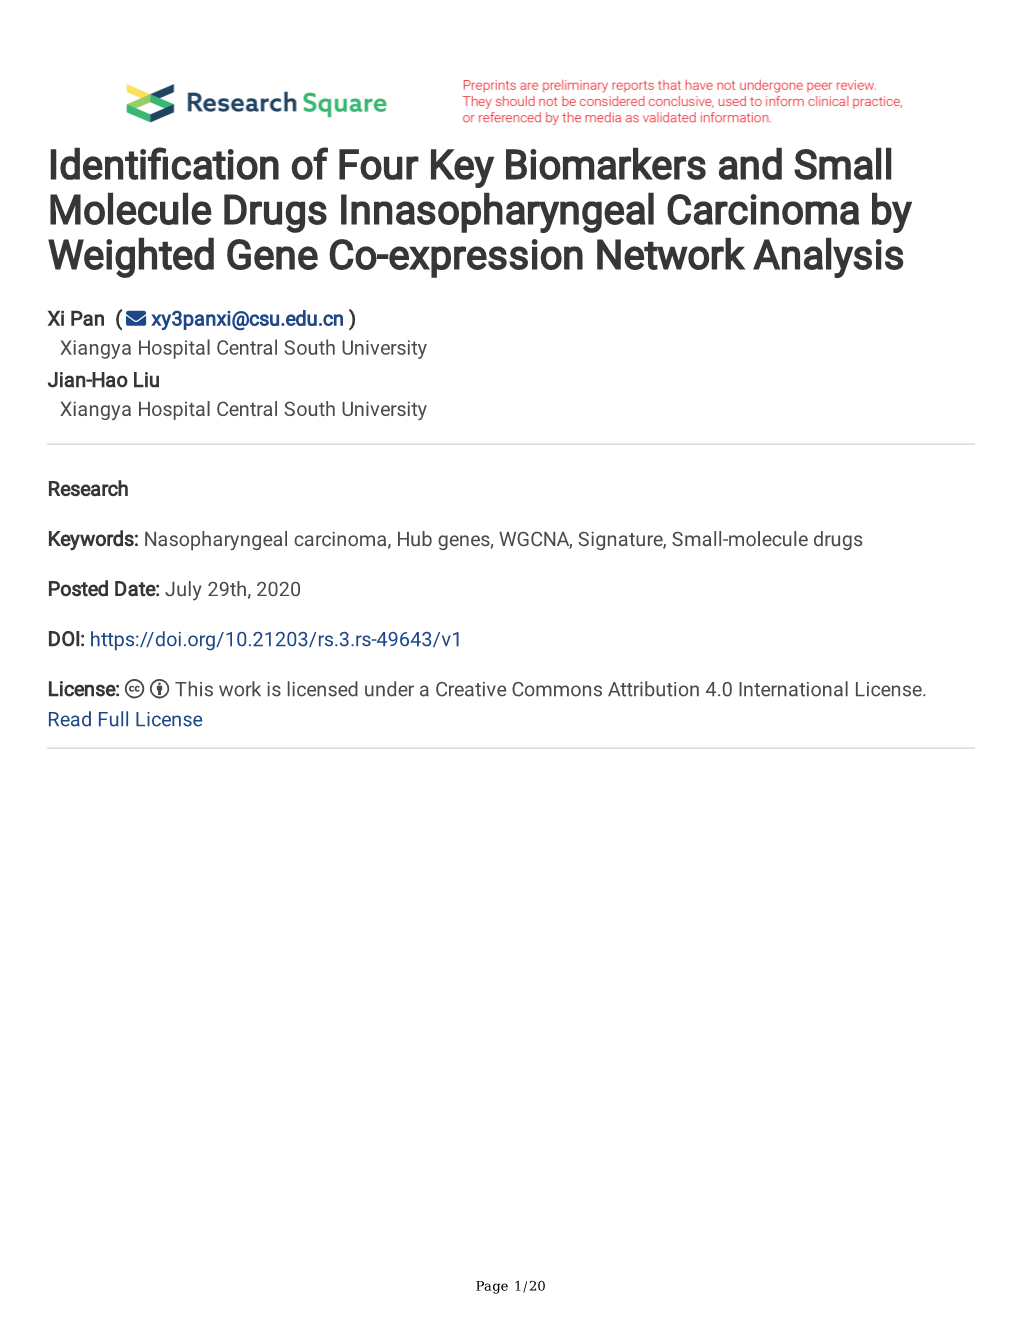 Identi Cation of Four Key Biomarkers and Small Molecule Drugs Innasopharyngeal Carcinoma by Weighted Gene Co-Expression Network